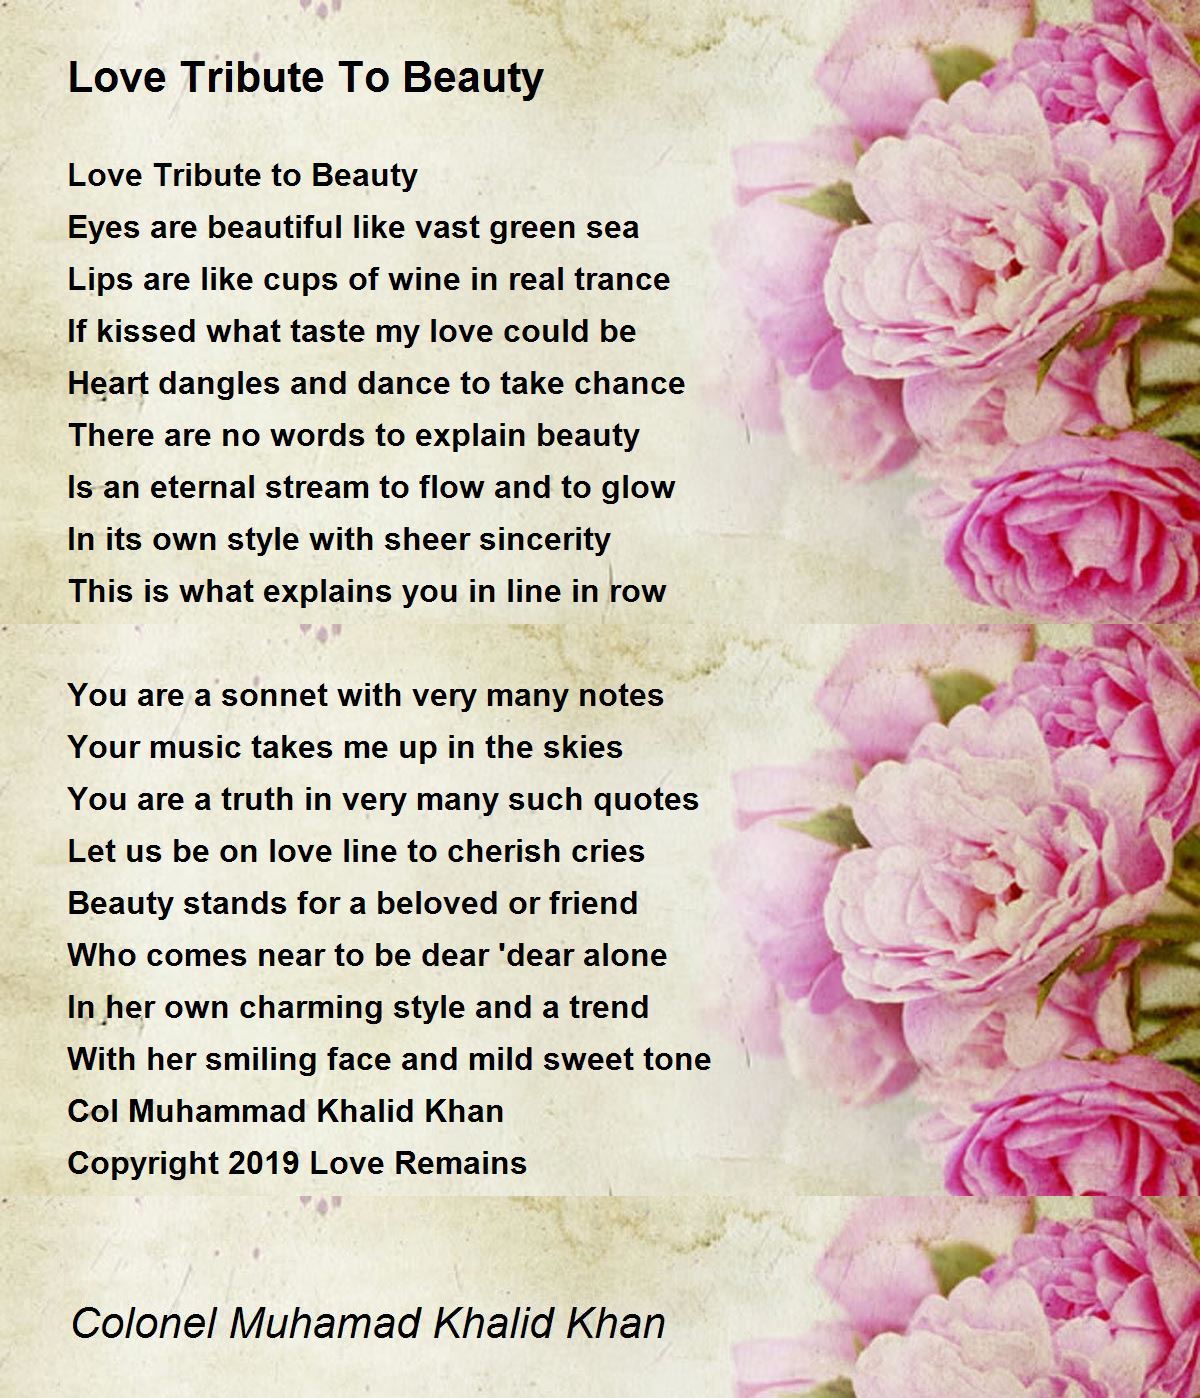 Love Tribute To Beauty - Love Tribute To Beauty Poem by Colonel ...